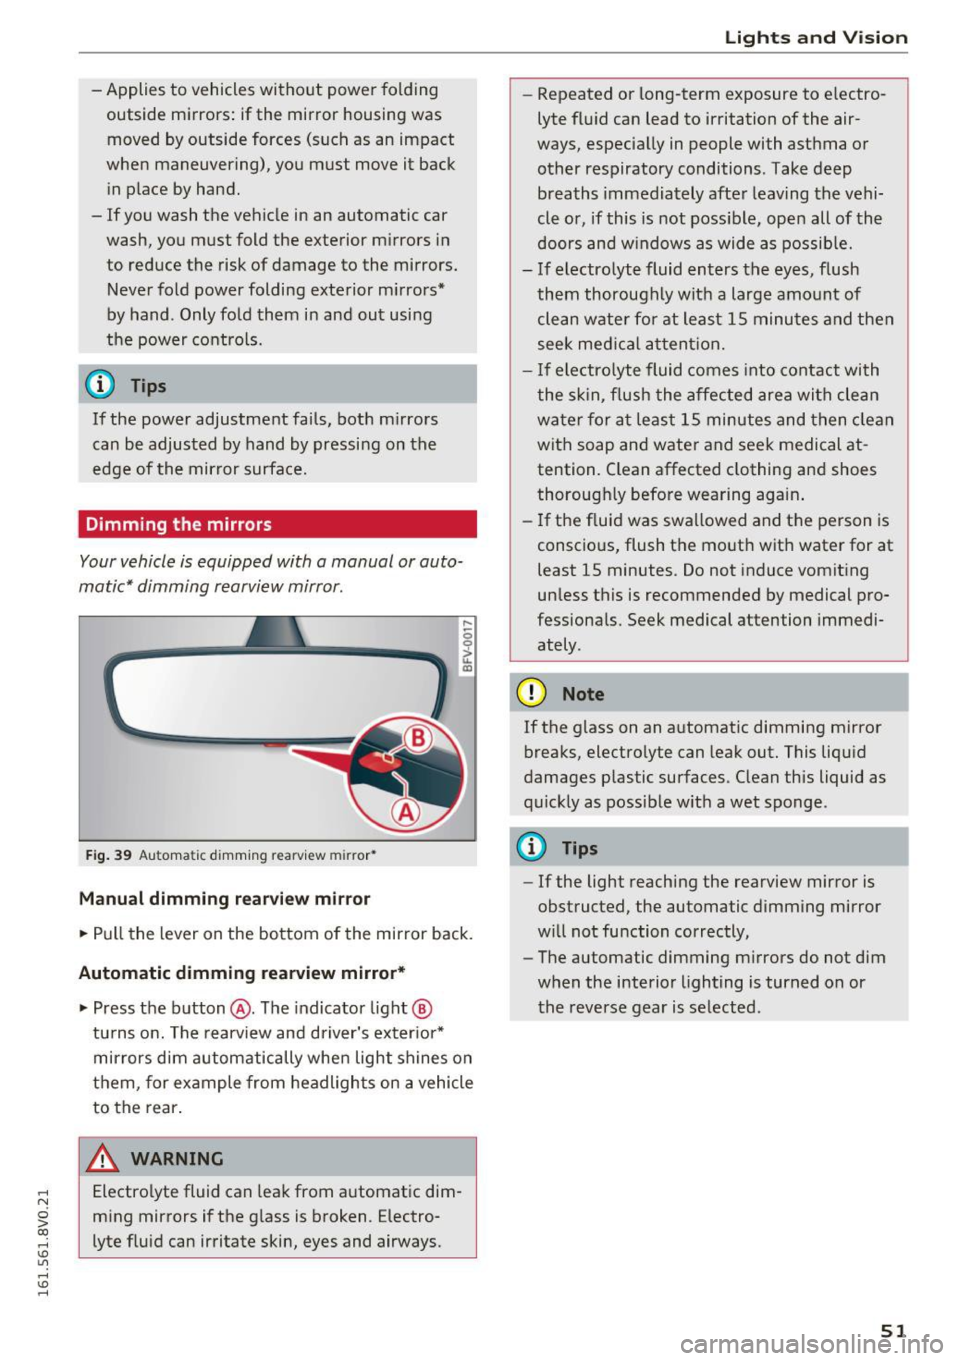 AUDI S3 2016  Owners Manual .... N 
0 > CX) 
.... I.Cl U"I 
.... I.Cl .... 
-Applies  to  vehicles  without  power  folding 
outside  mirrors : if the  mirror  housing  was 
moved  by outside  forces  (such  as  an  impact 
when